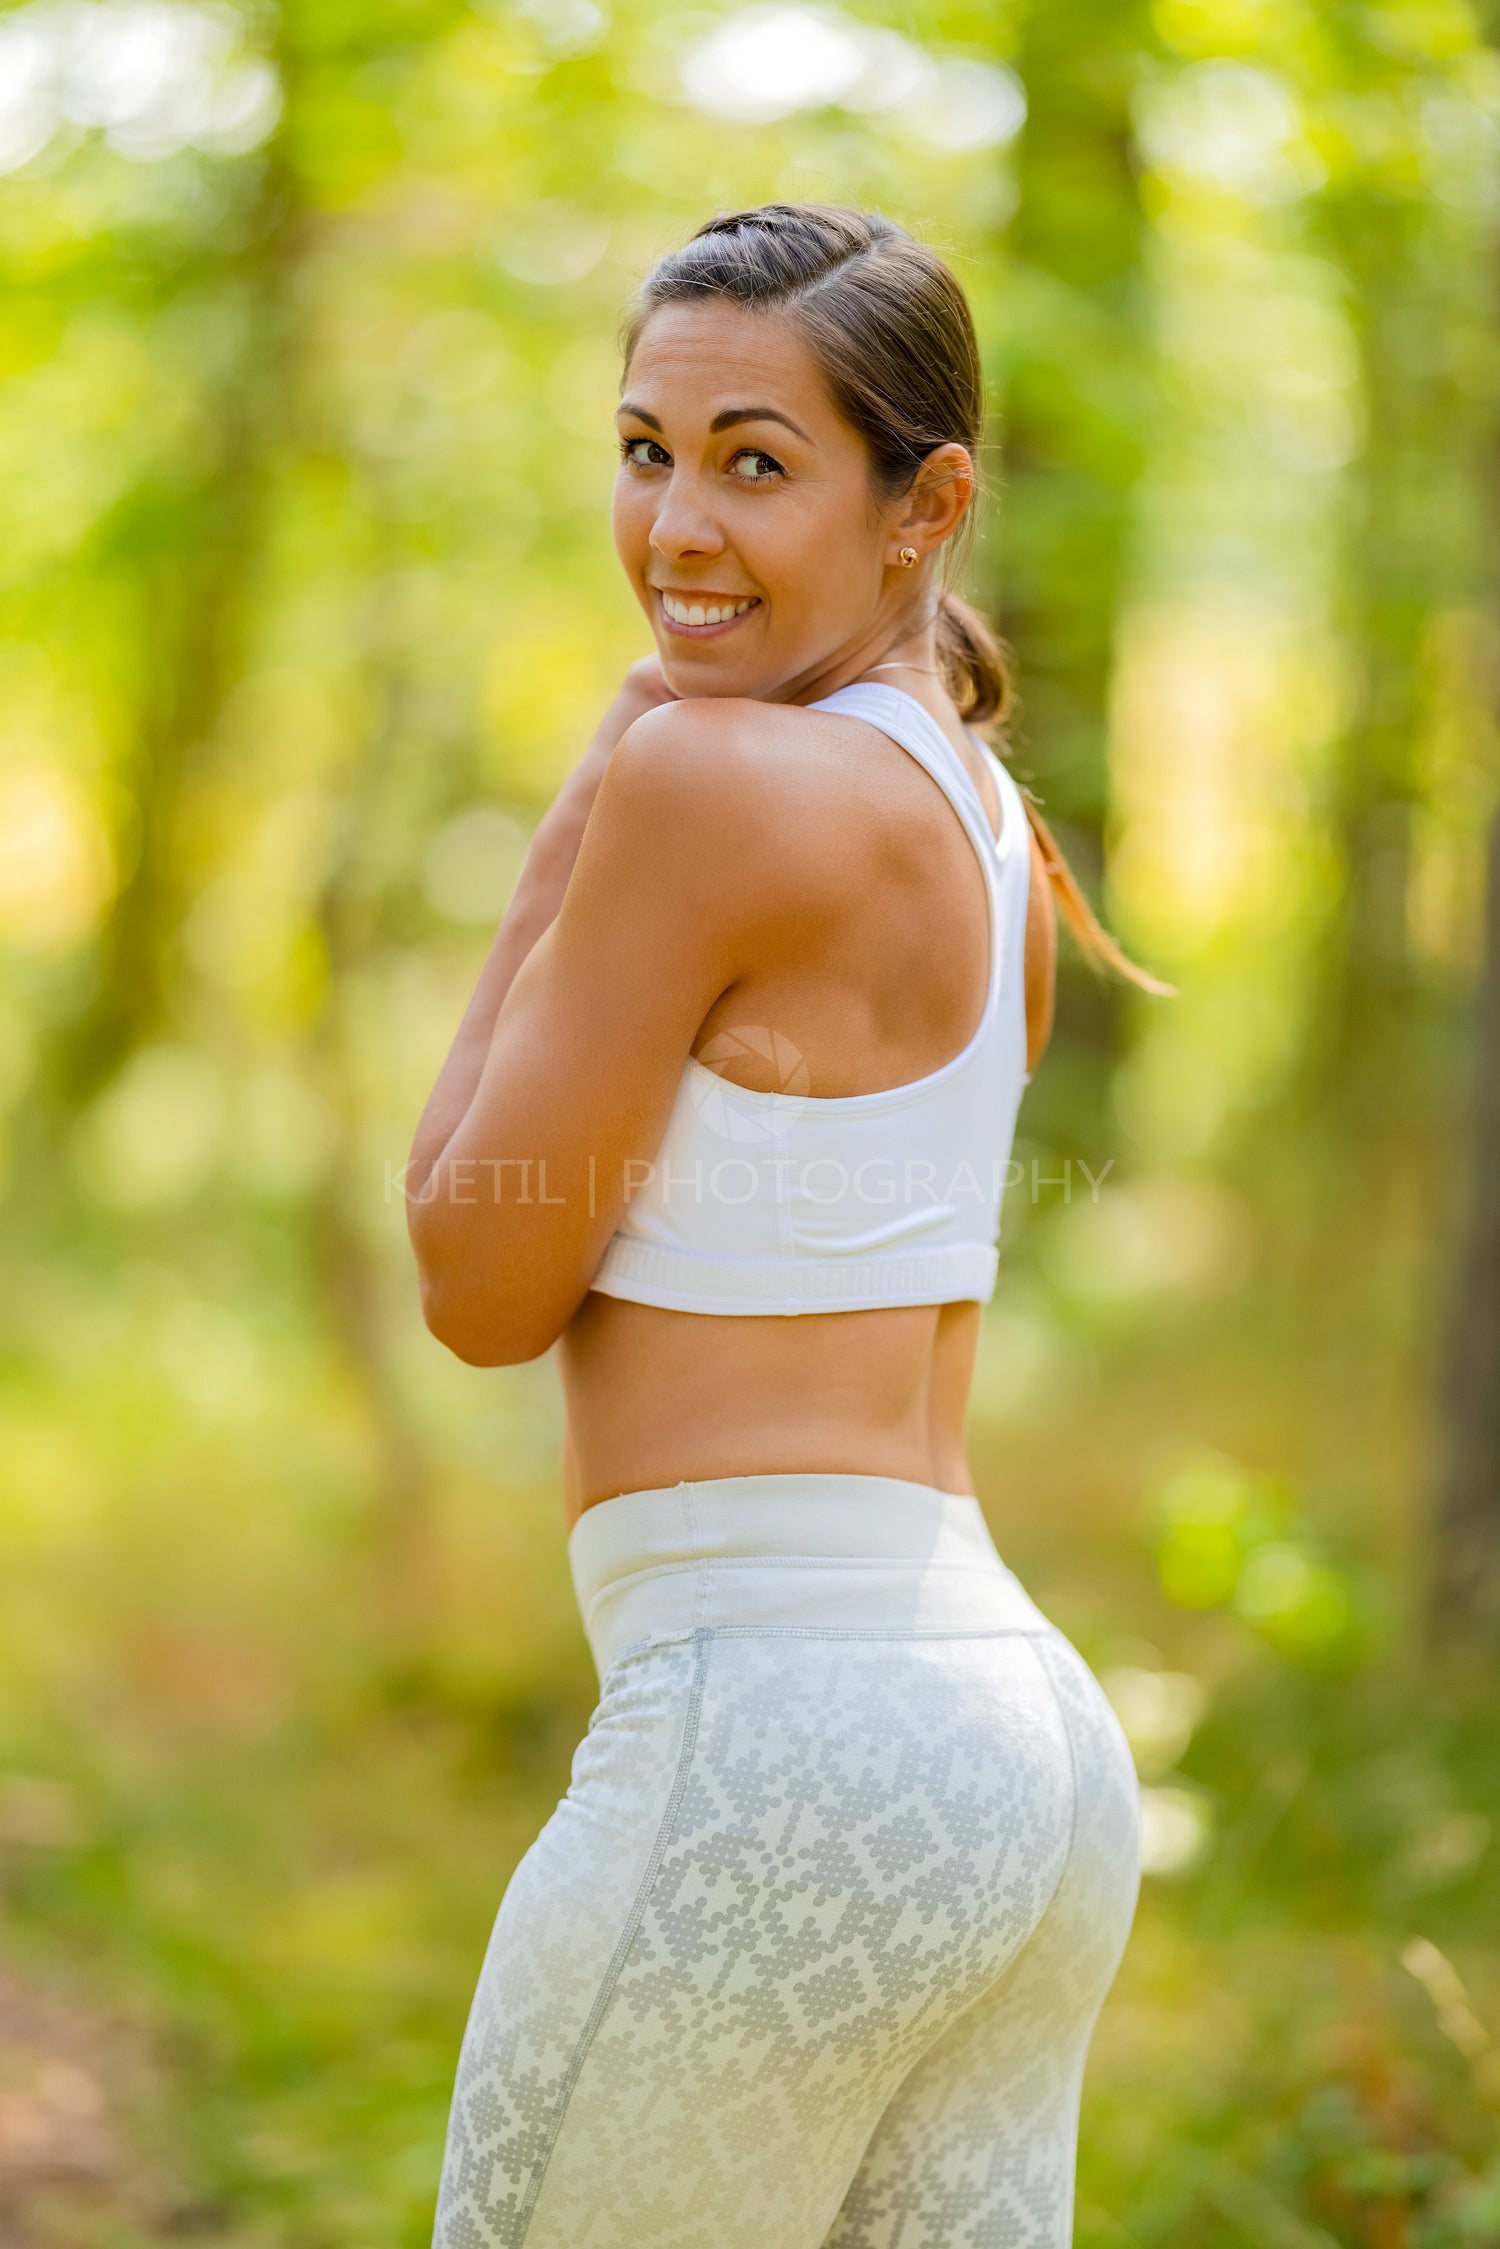 Smiling Athletic Woman In Sportswear Against Trees